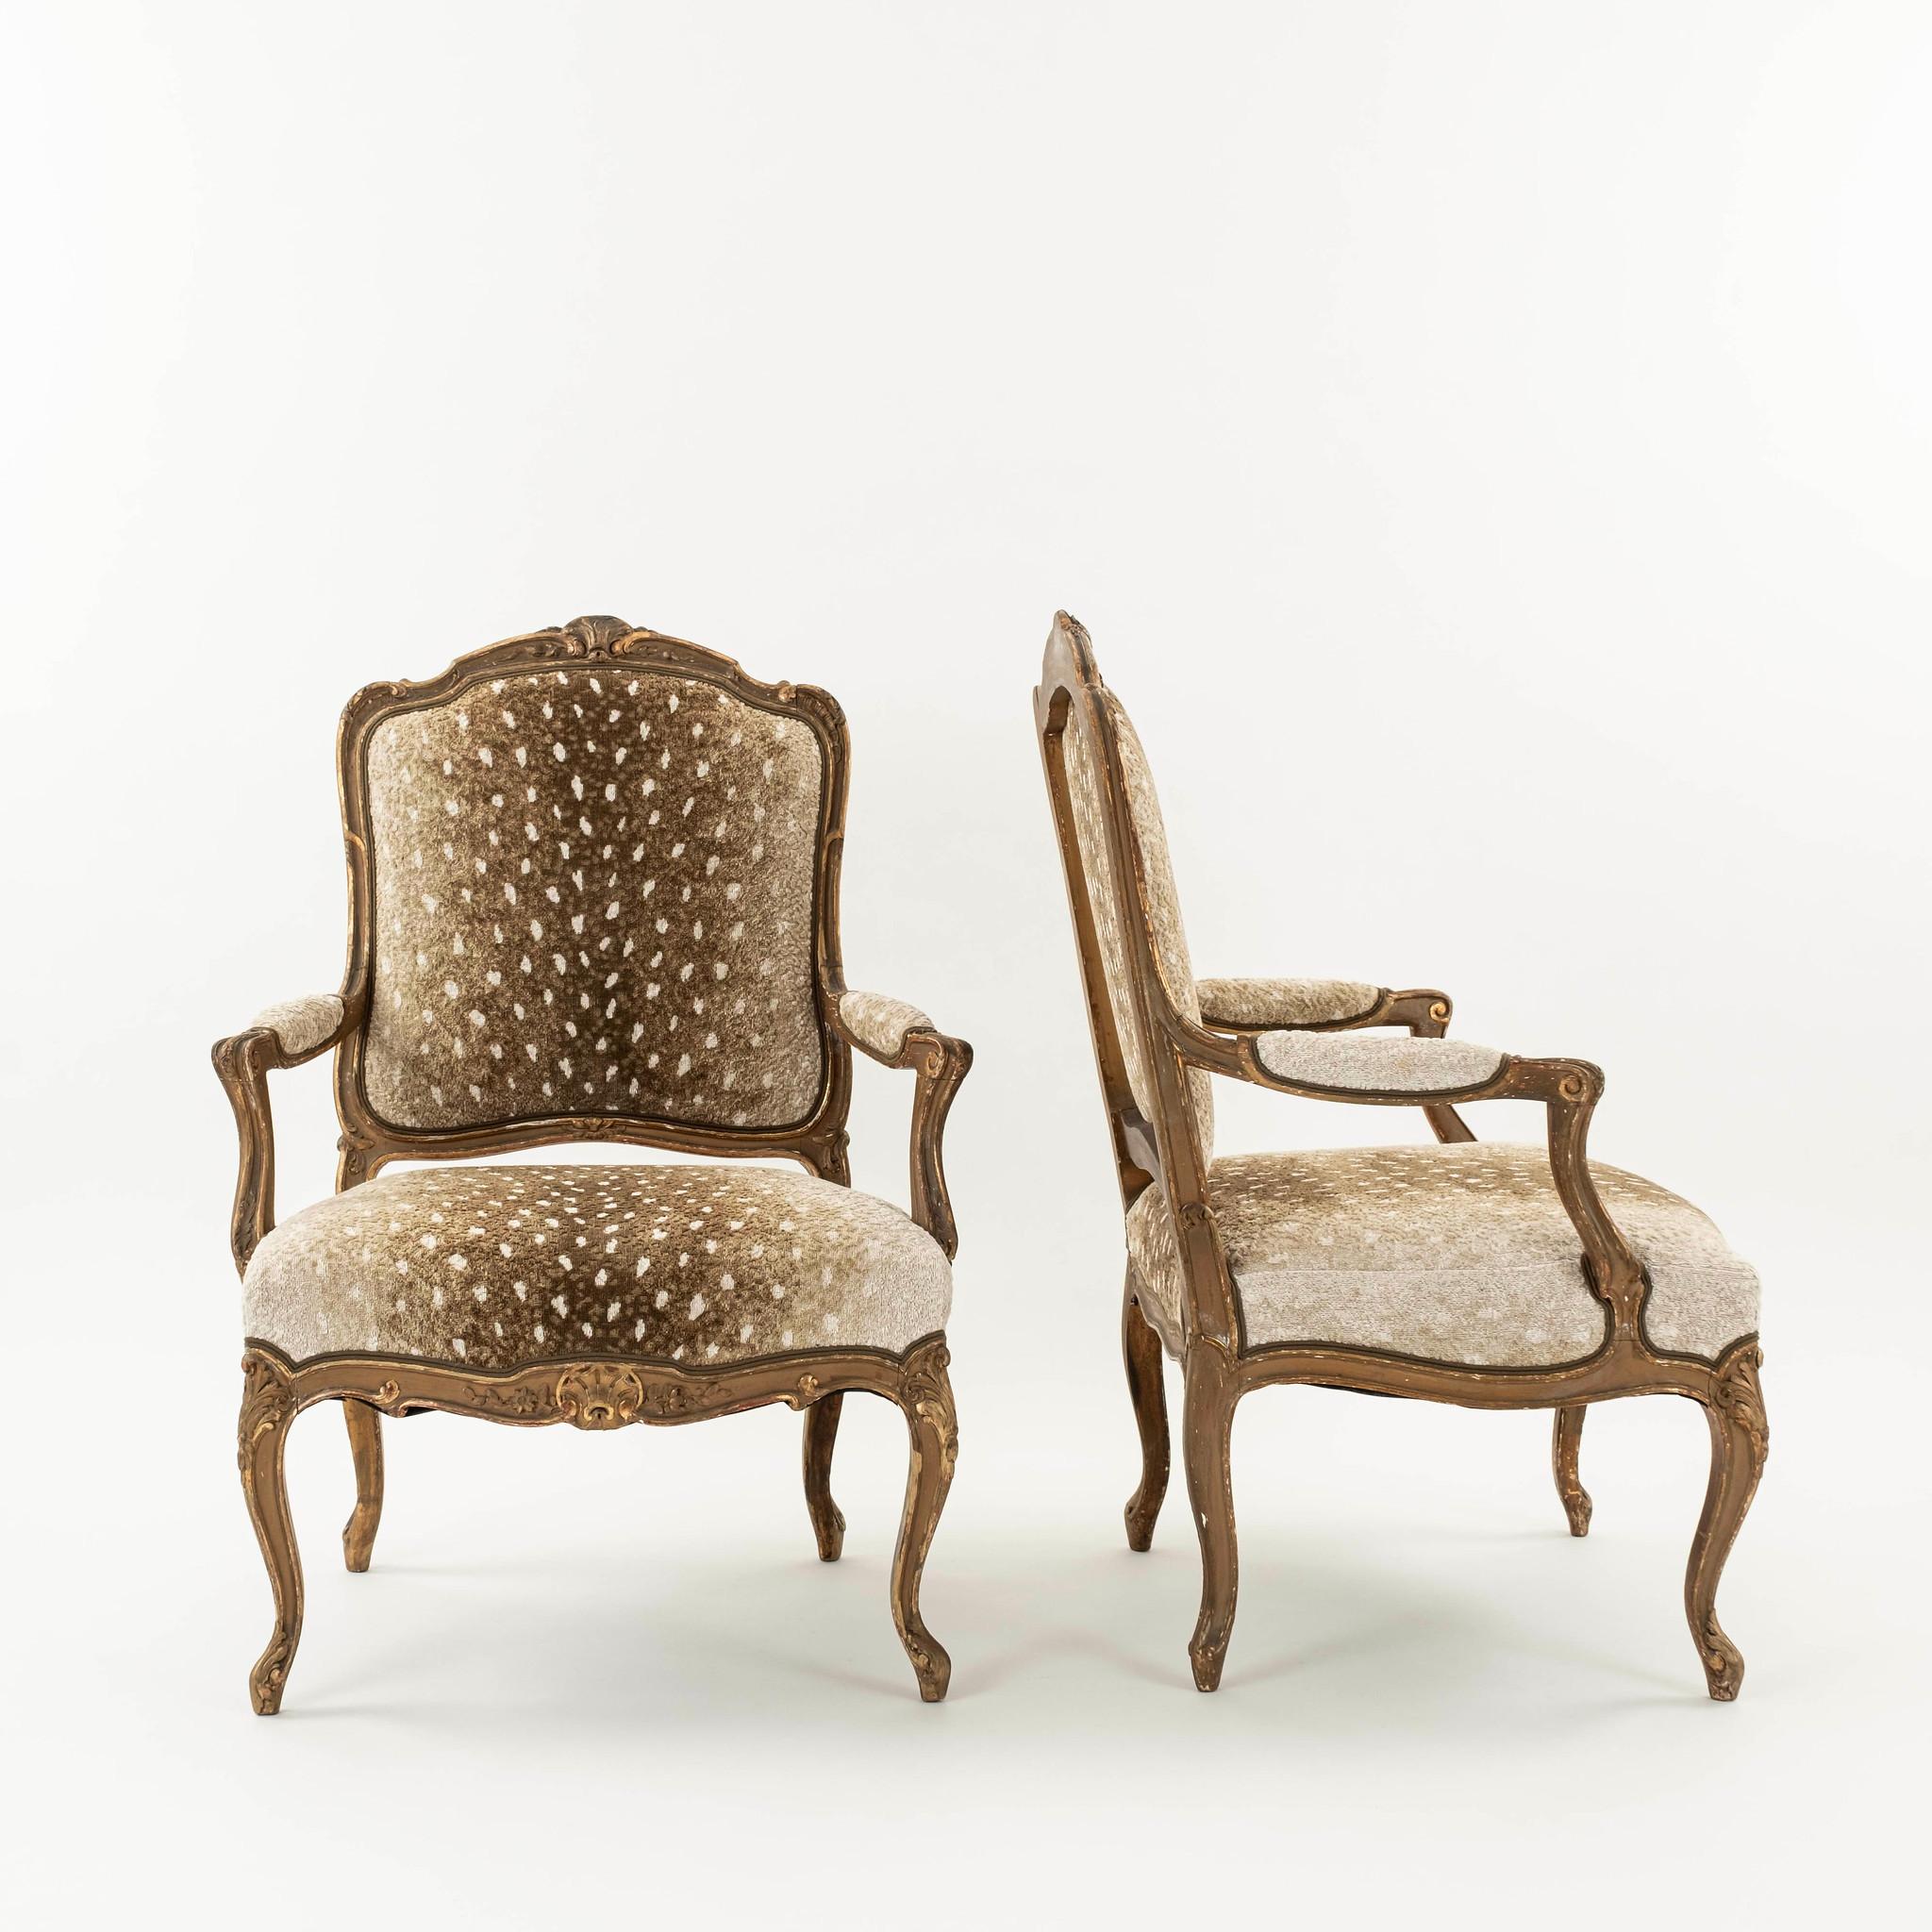 A pair of 19th Century French painted and giltwood fauteuils newly upholstered in Schumacher's  Axis Fawn Linen Velvet.